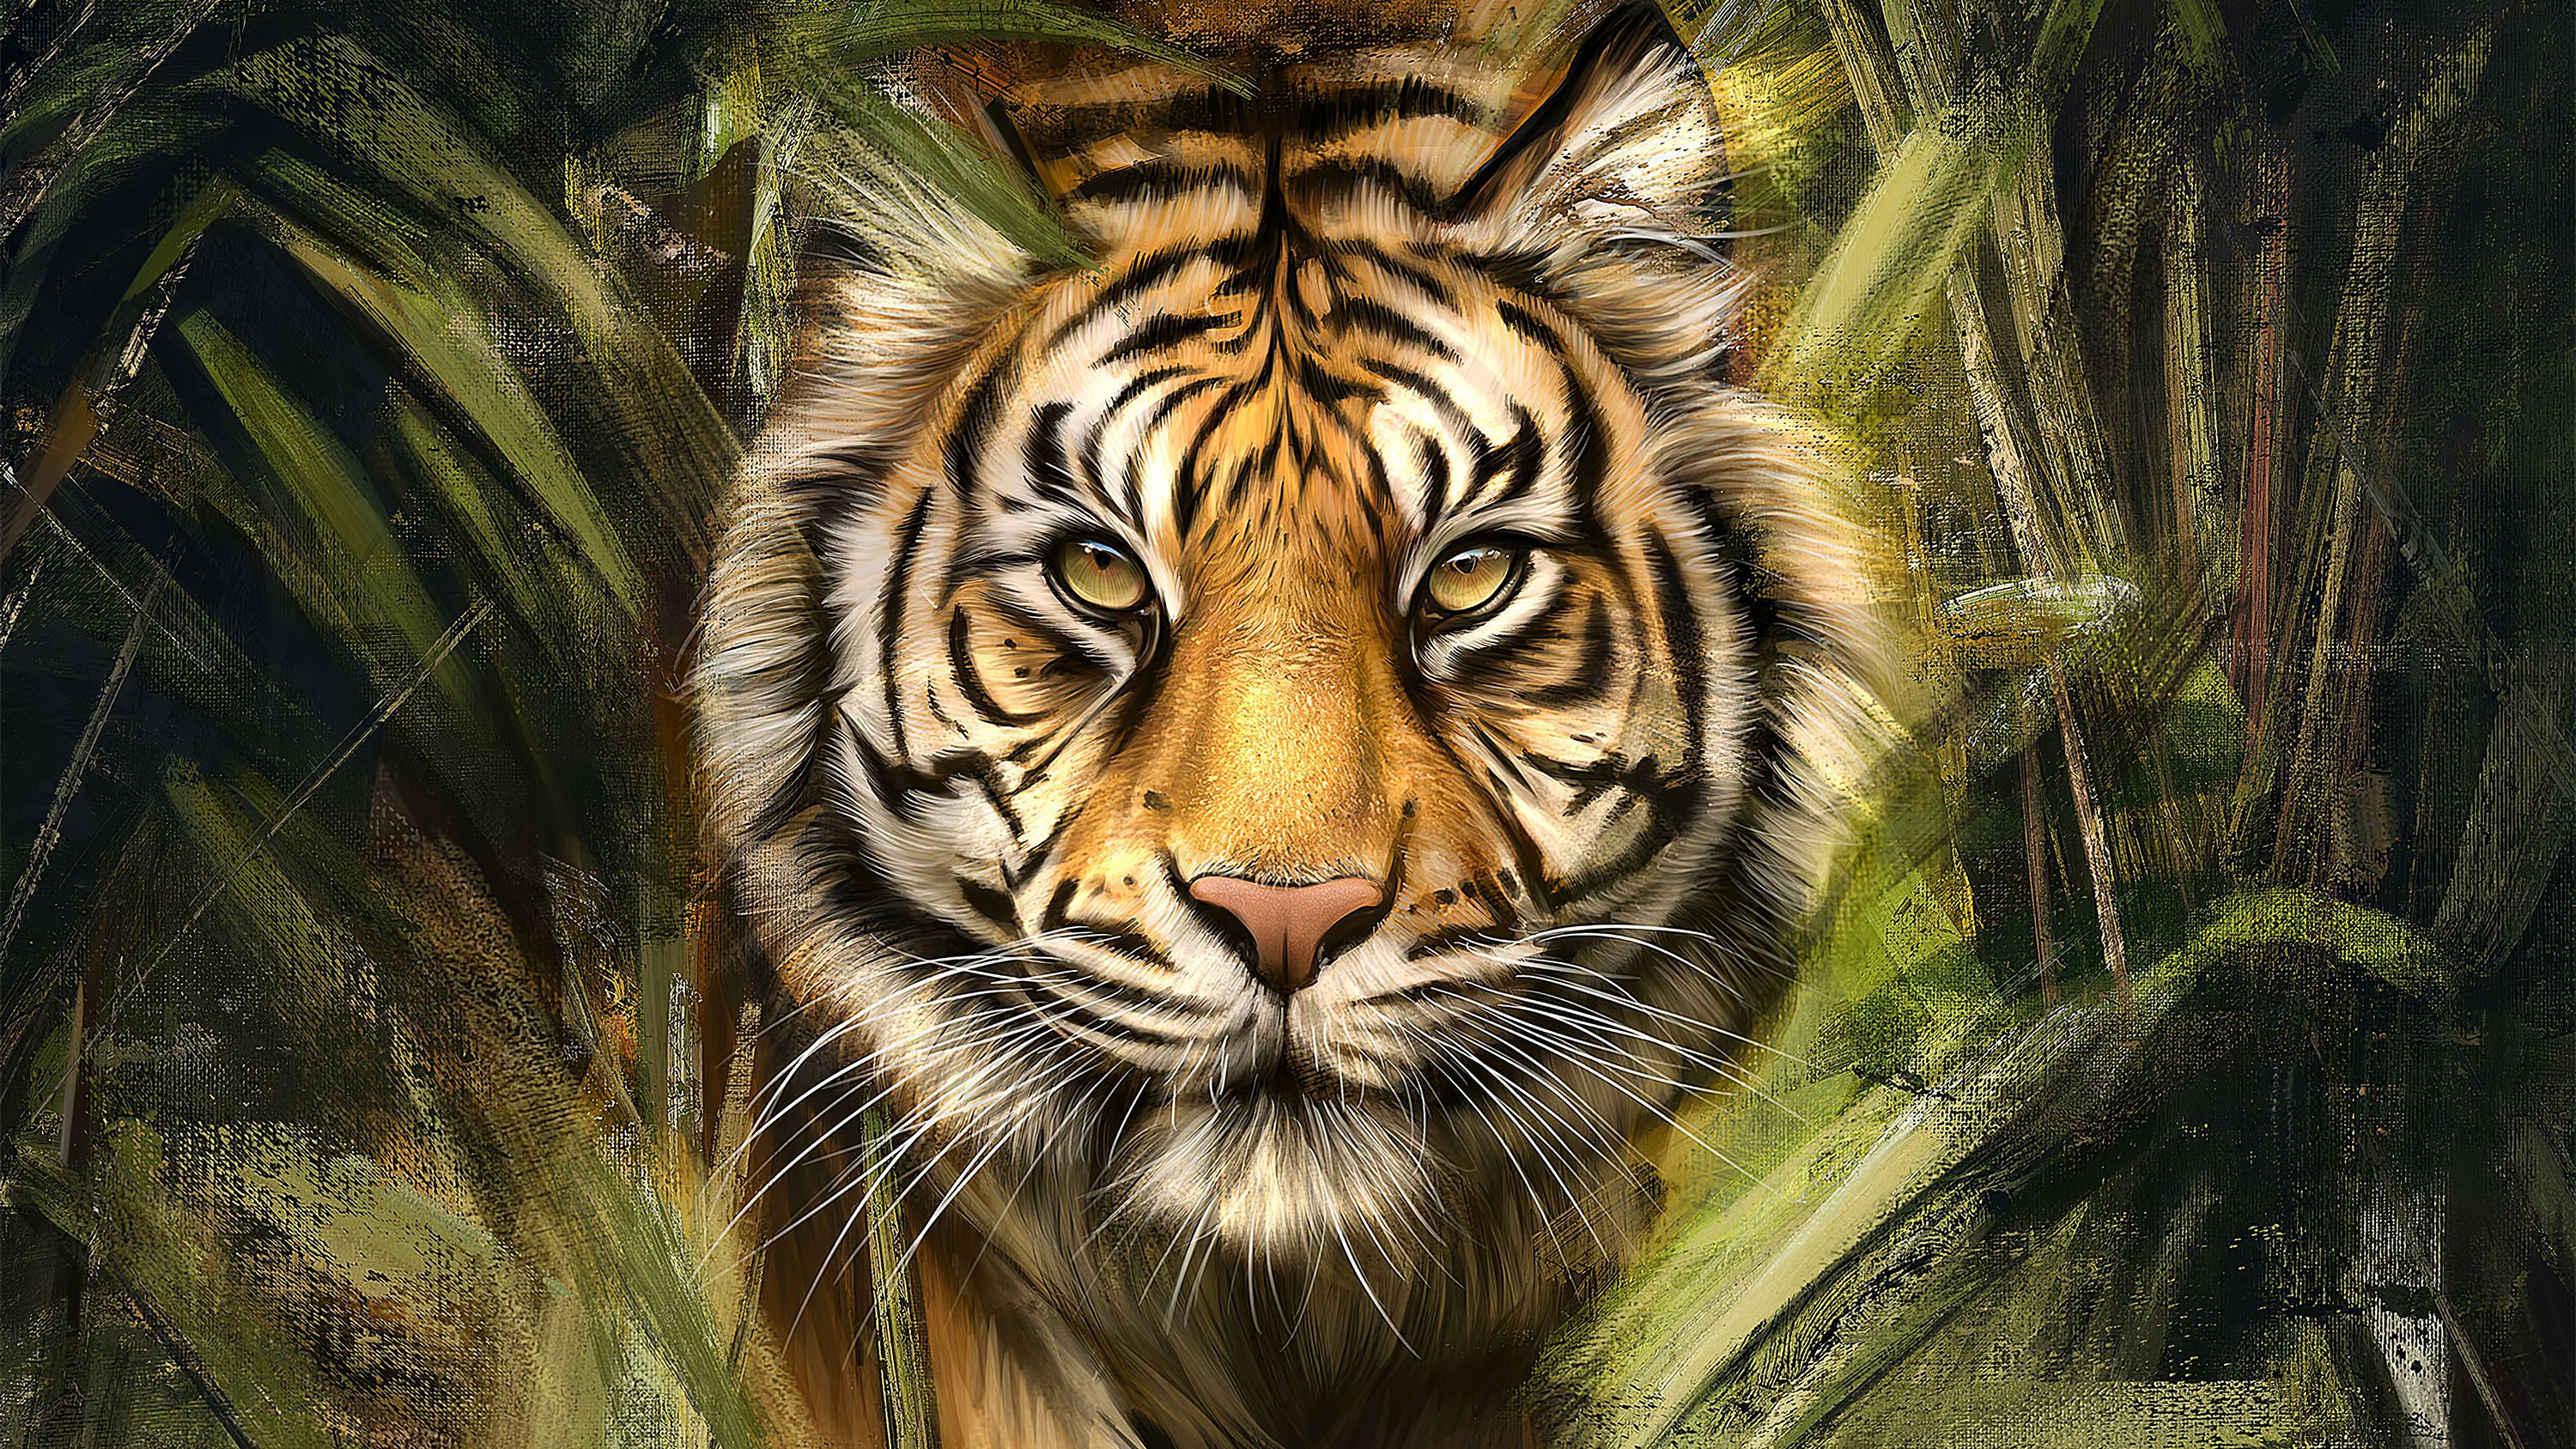 Tiger Painting Art, HD Animals, 4k Wallpaper, Image, Background, Photo and Picture